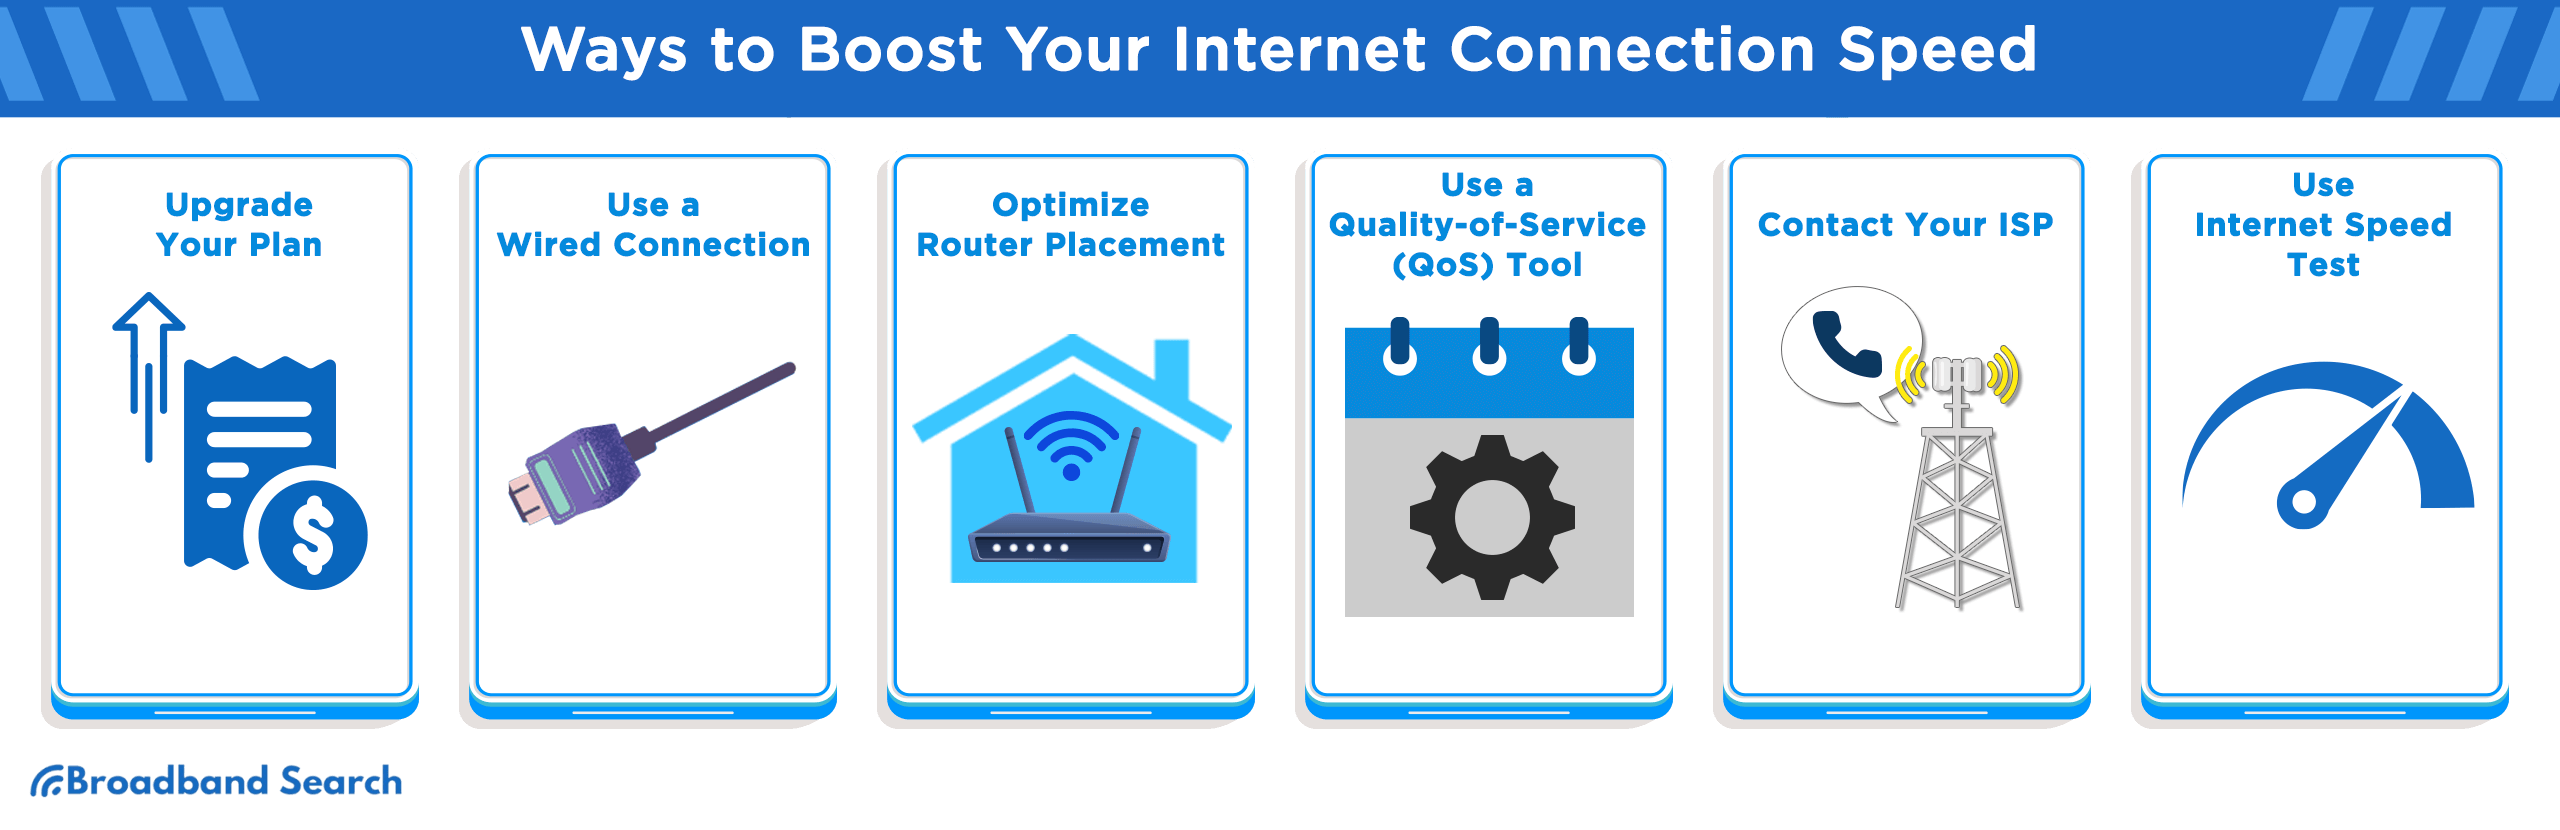 Ways to boost your internet connection speed